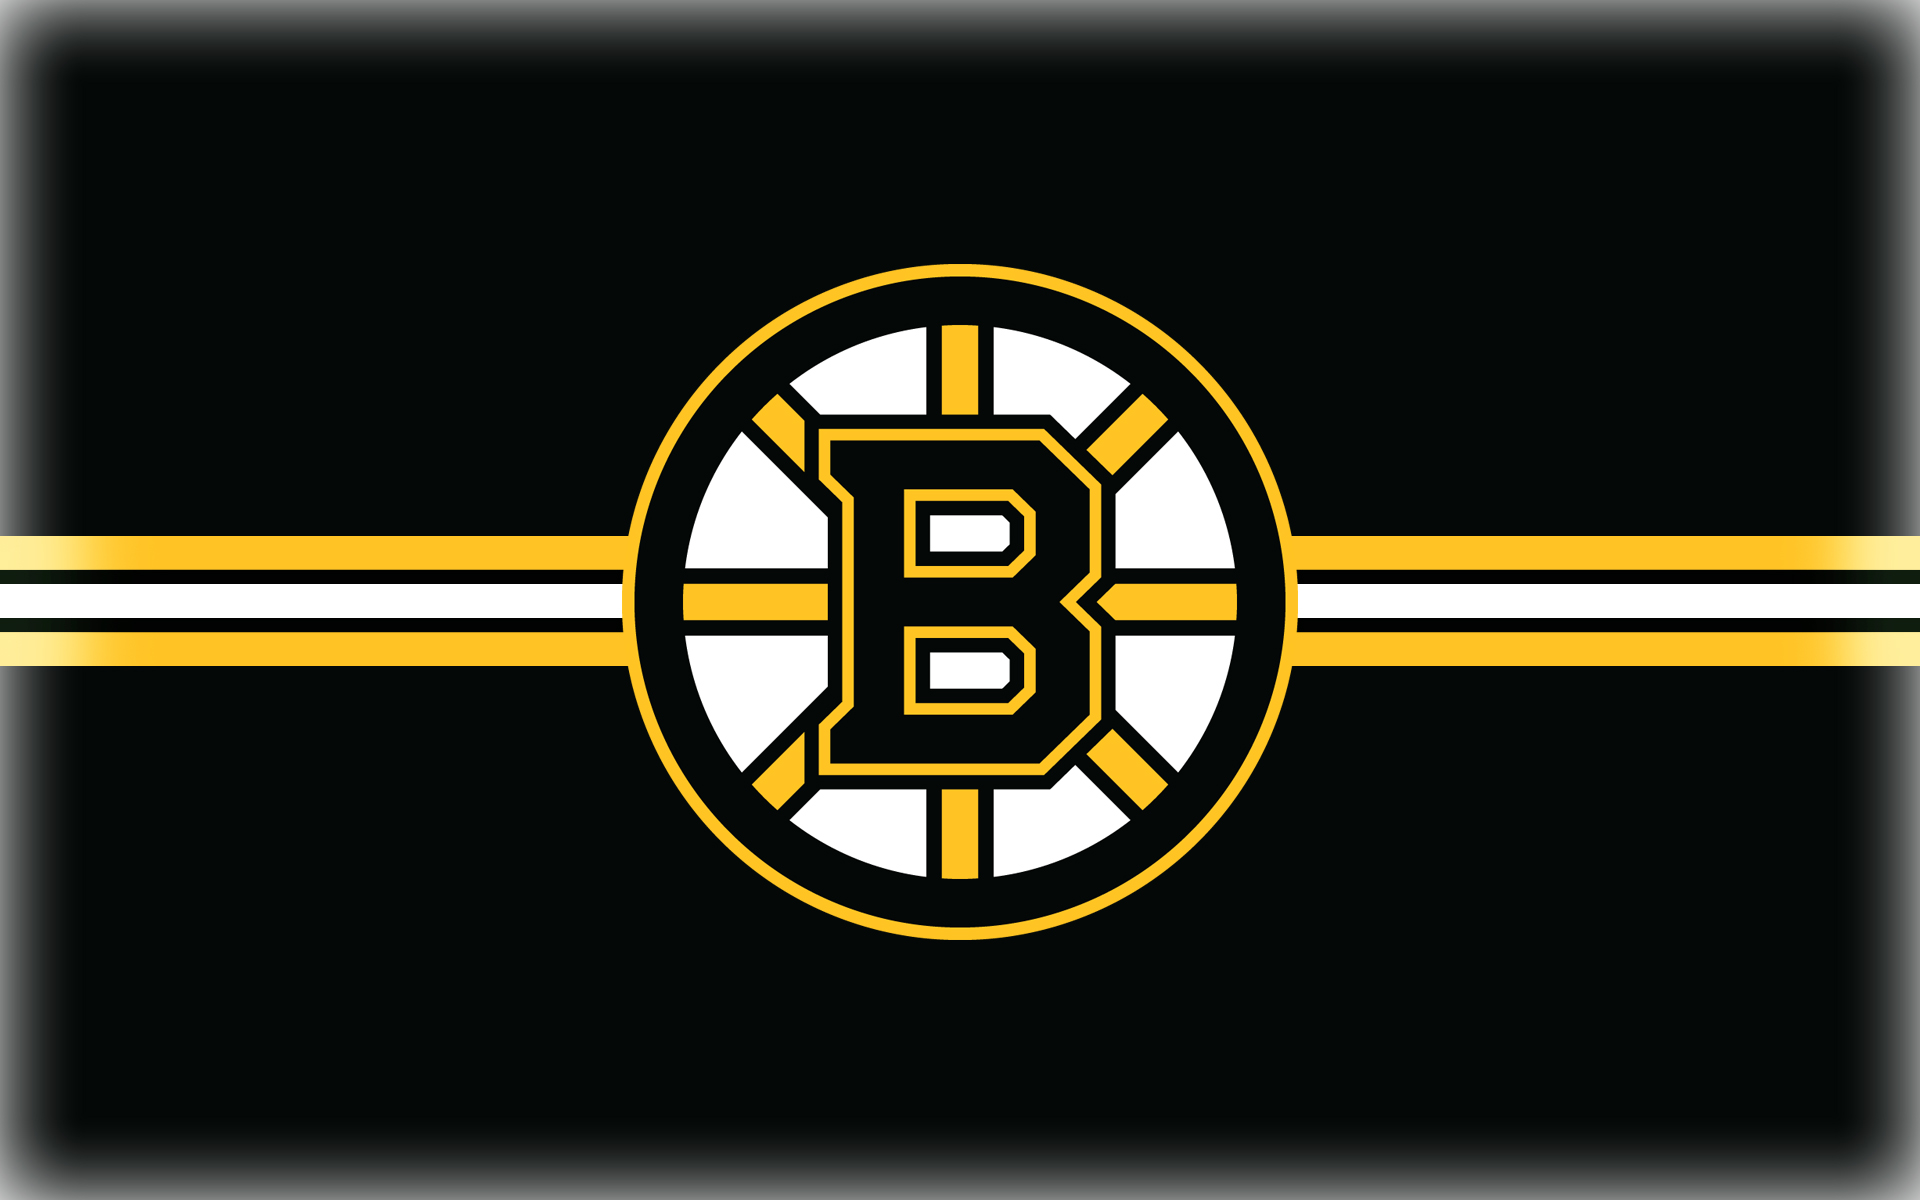 We love this. Bringing wallpapers everyday so you can enjoy them all! :DToday, a Boston Bruins background..what more could you ask? :D